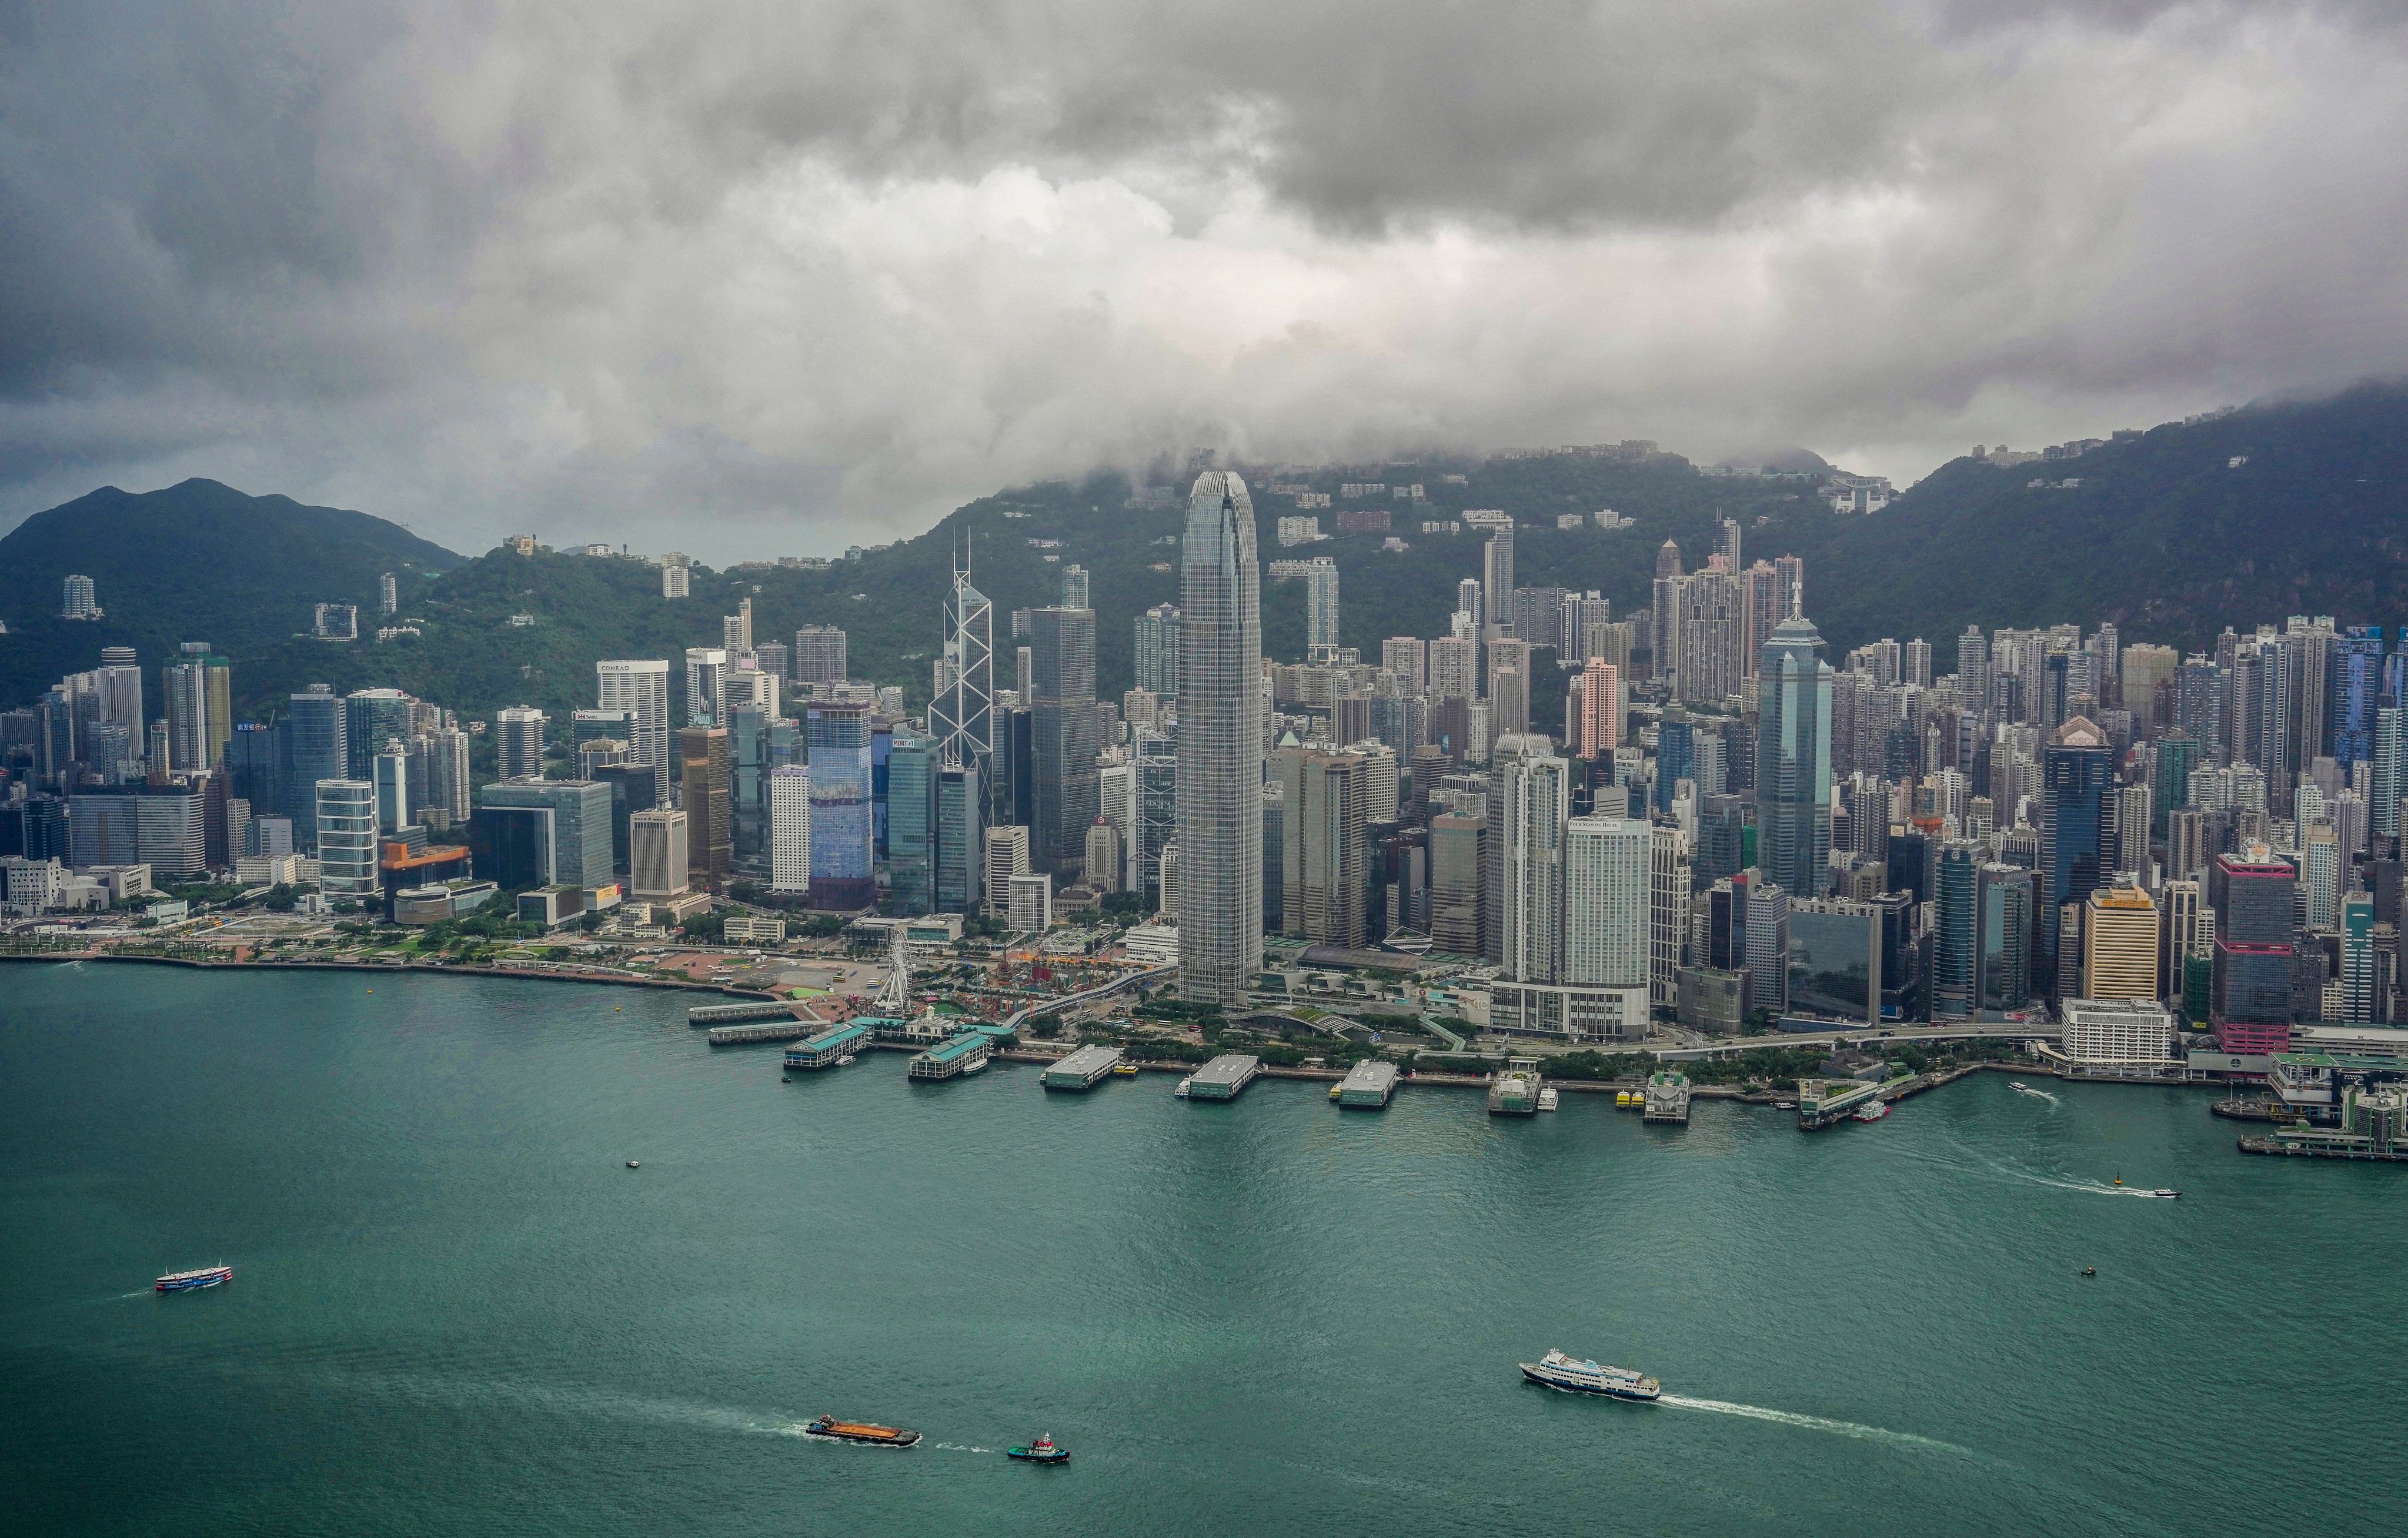 Hong Kong should not be selling itself short by merely chasing visitor numbers. High-quality growth is what it wants. Photo: Elson Li